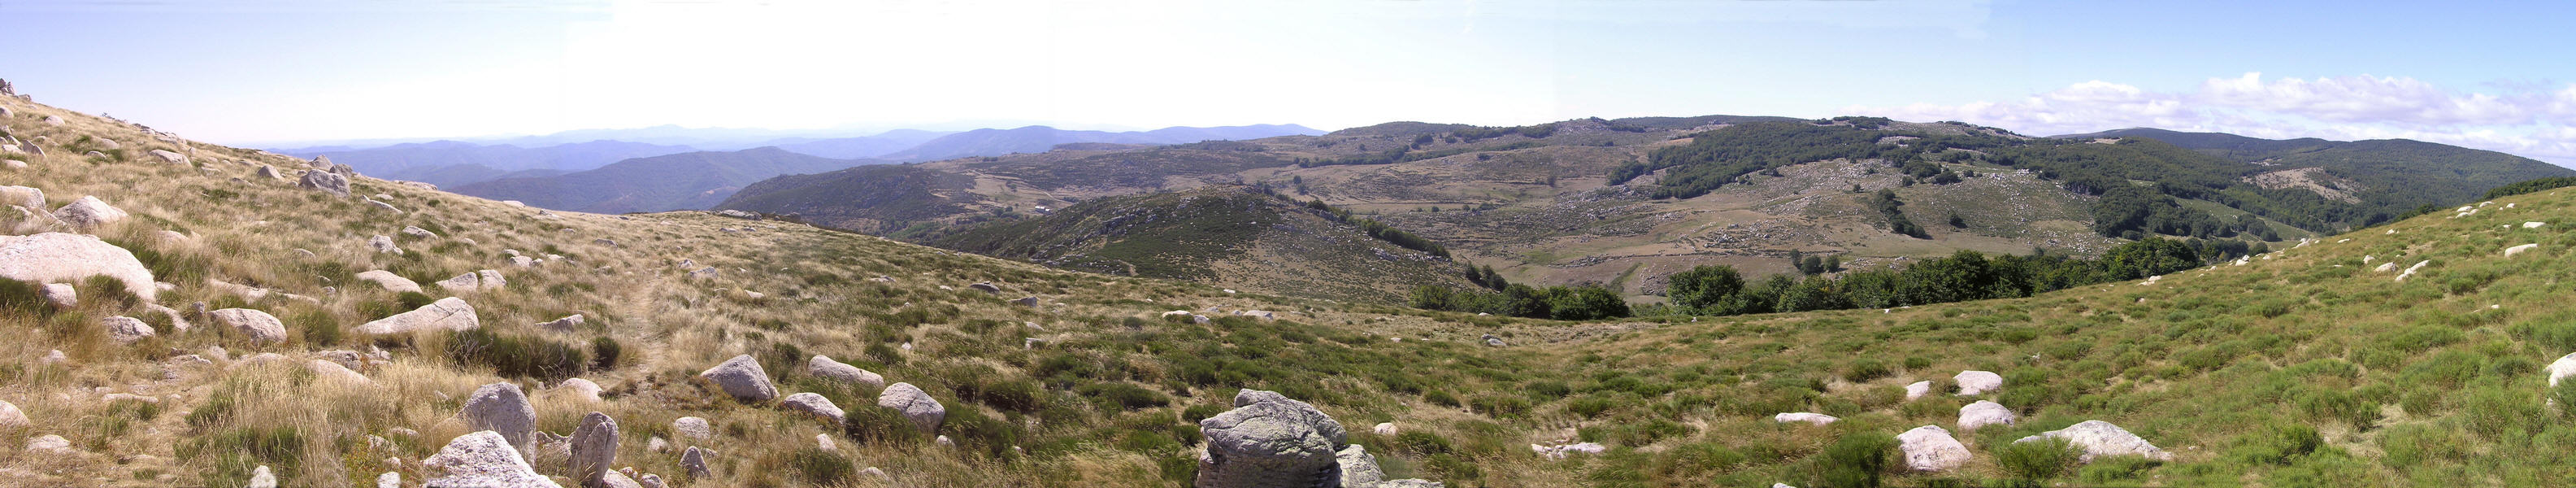 Panoramic view from the holiday's high point near La Jasse d'Olibou at just over 1400m. (435k)